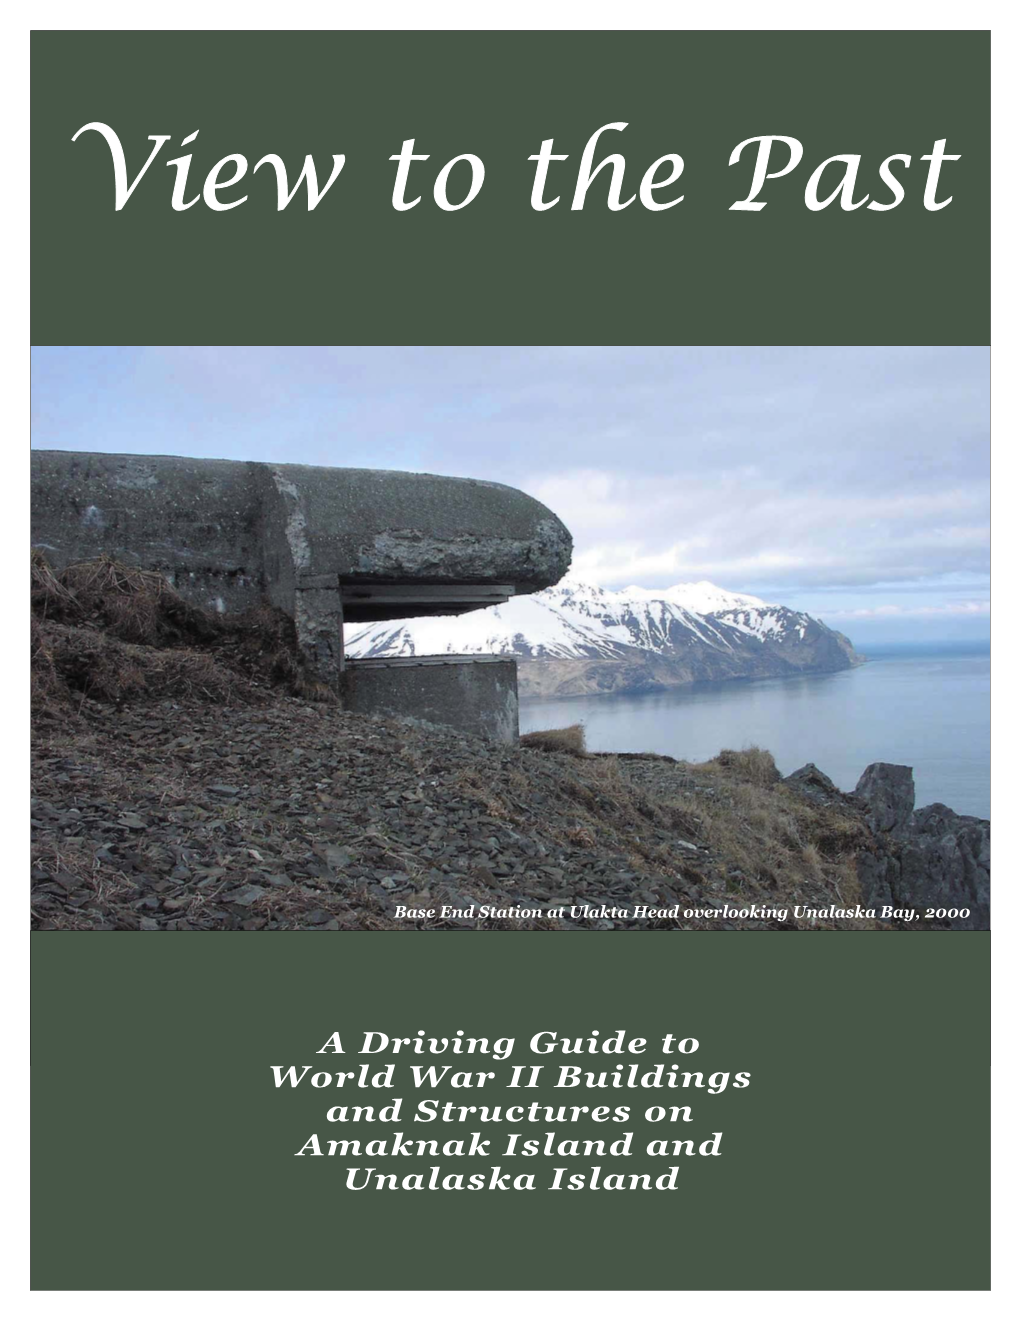 View to the Past: a Driving Guide for World War II Buildings And